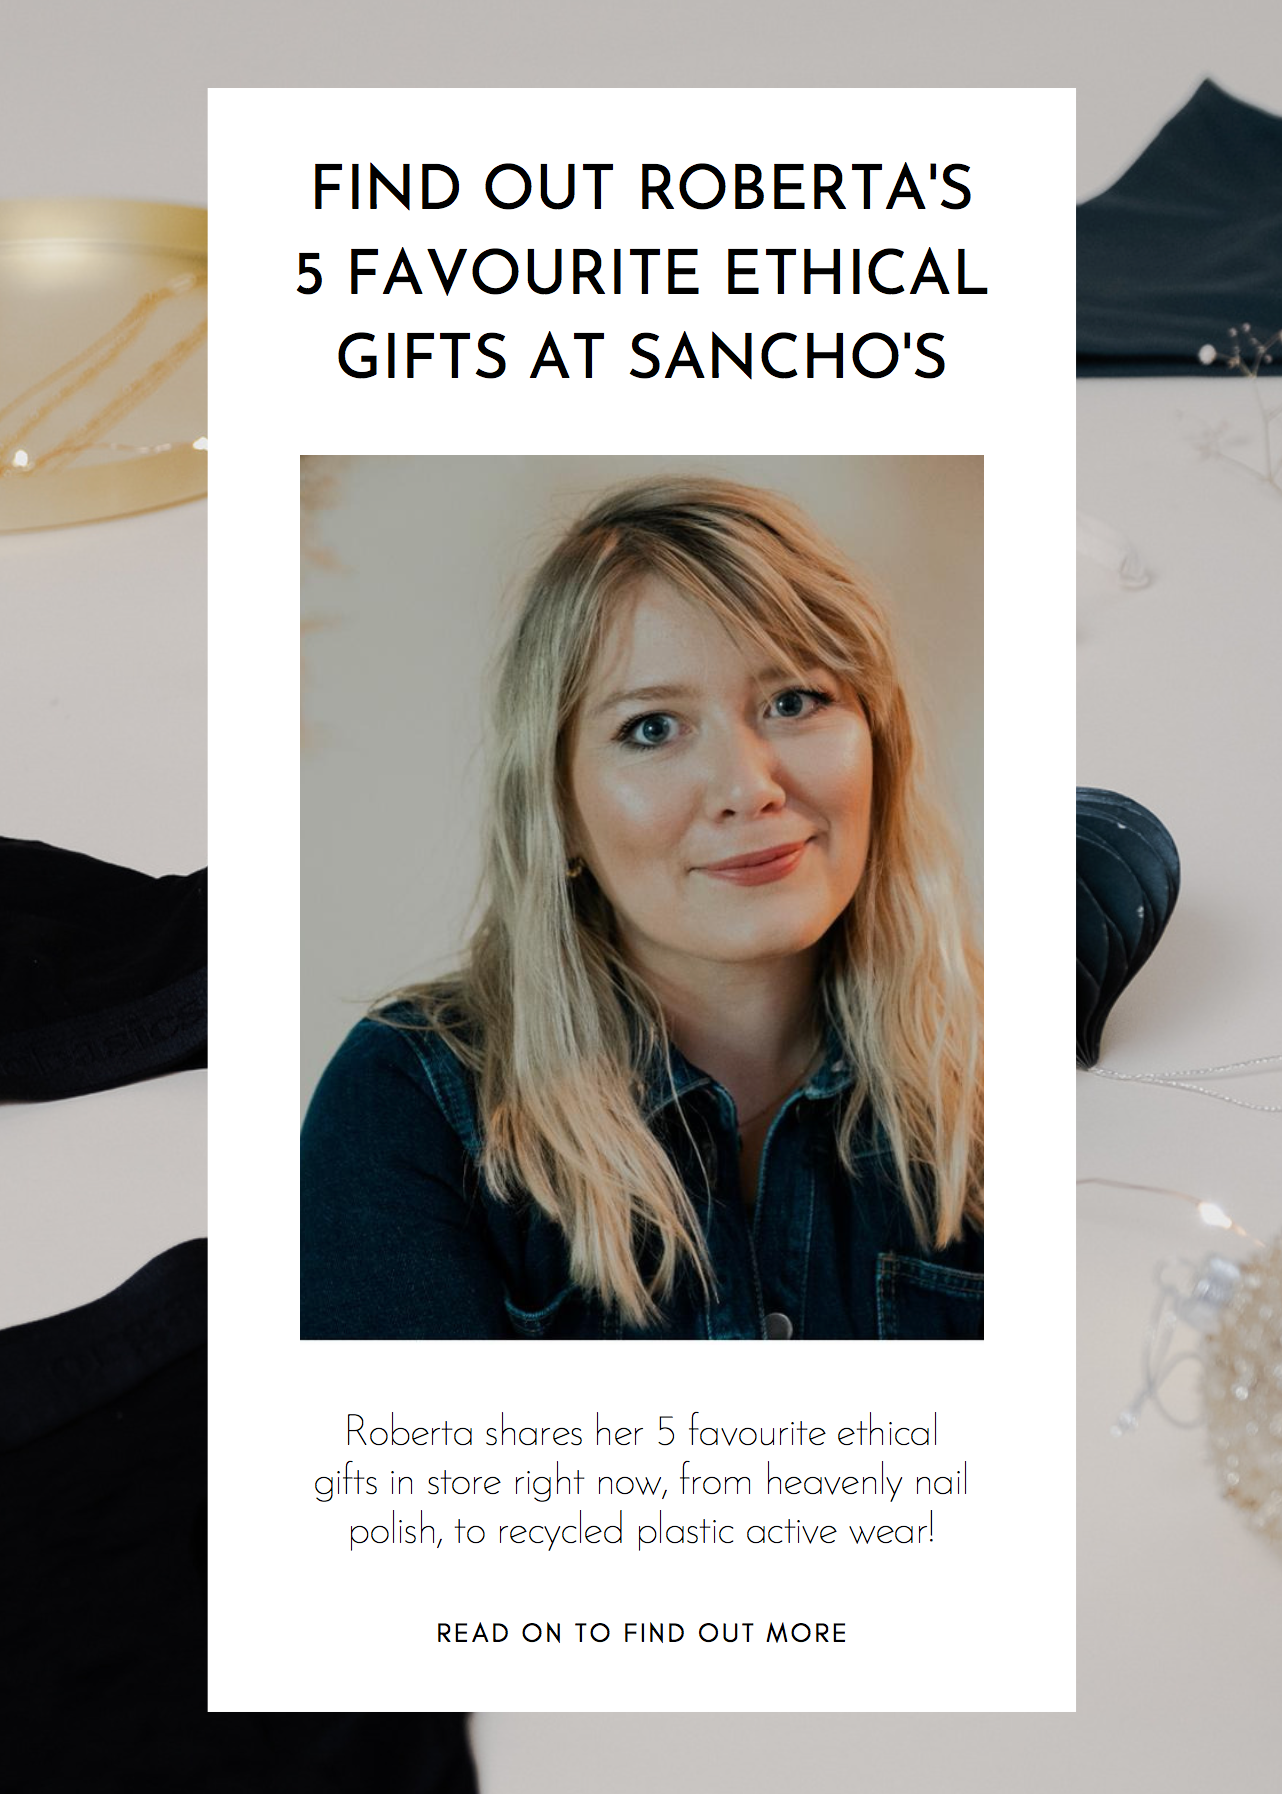 Find out Roberta’s 5 favourite ethical gifts